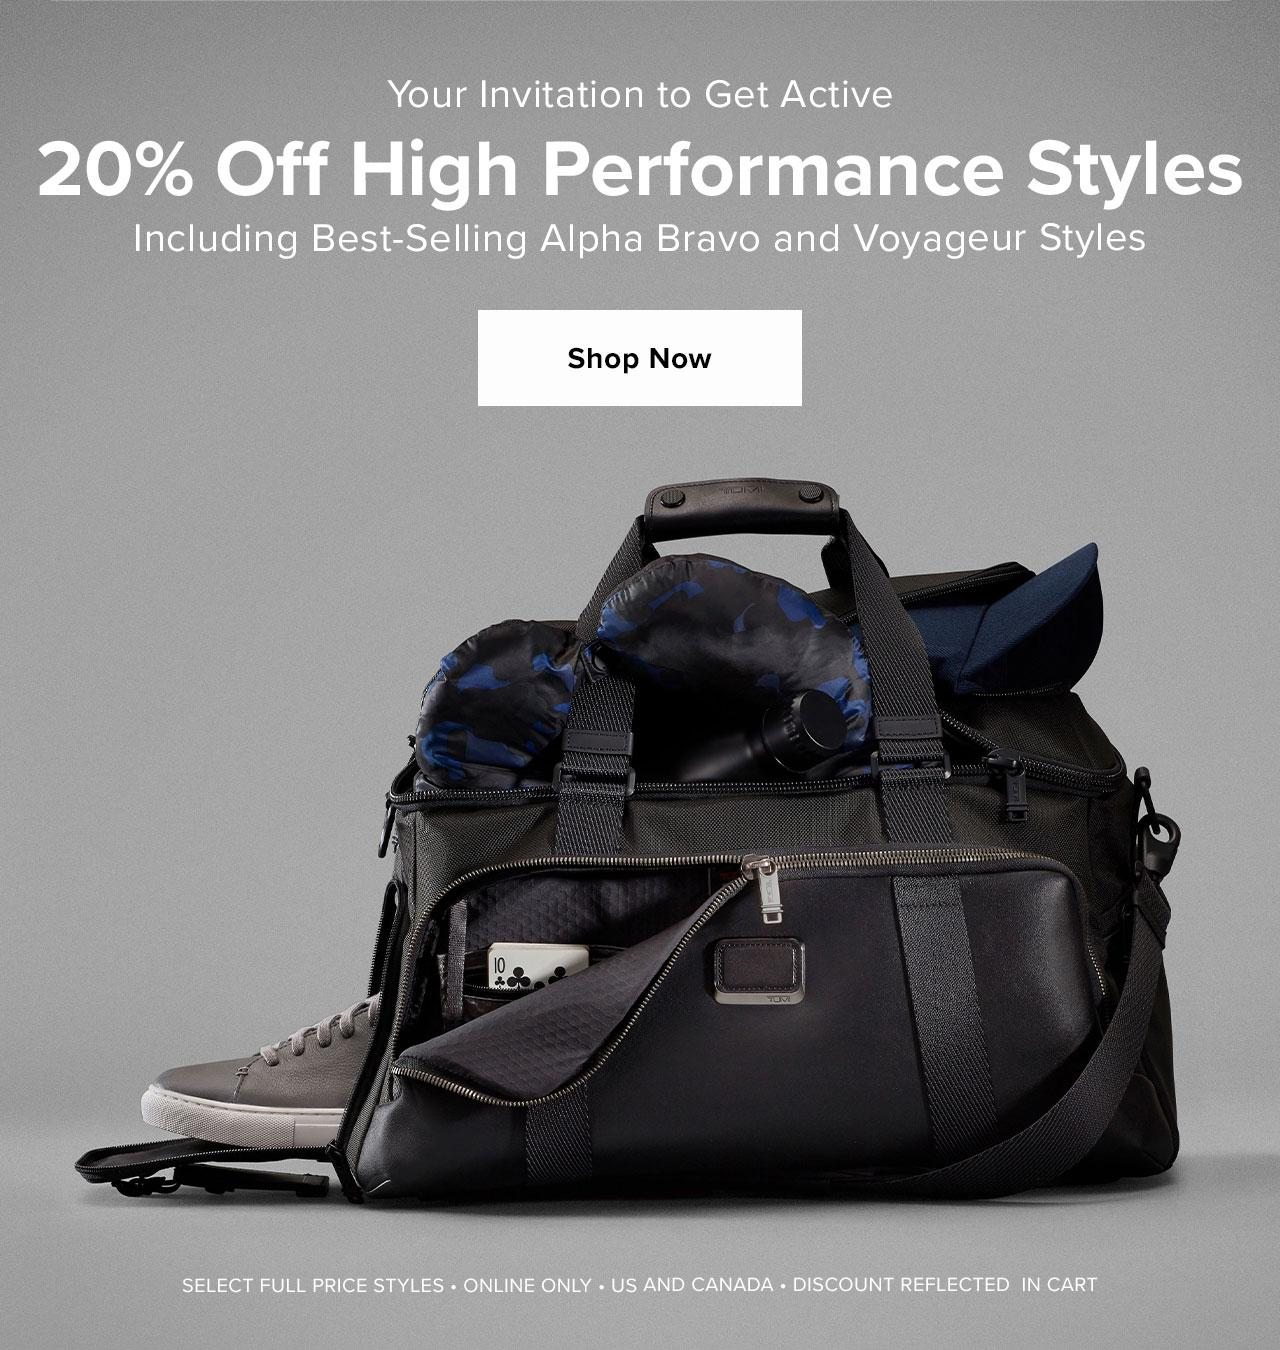 20% Off High Performance Styles - Shop Now